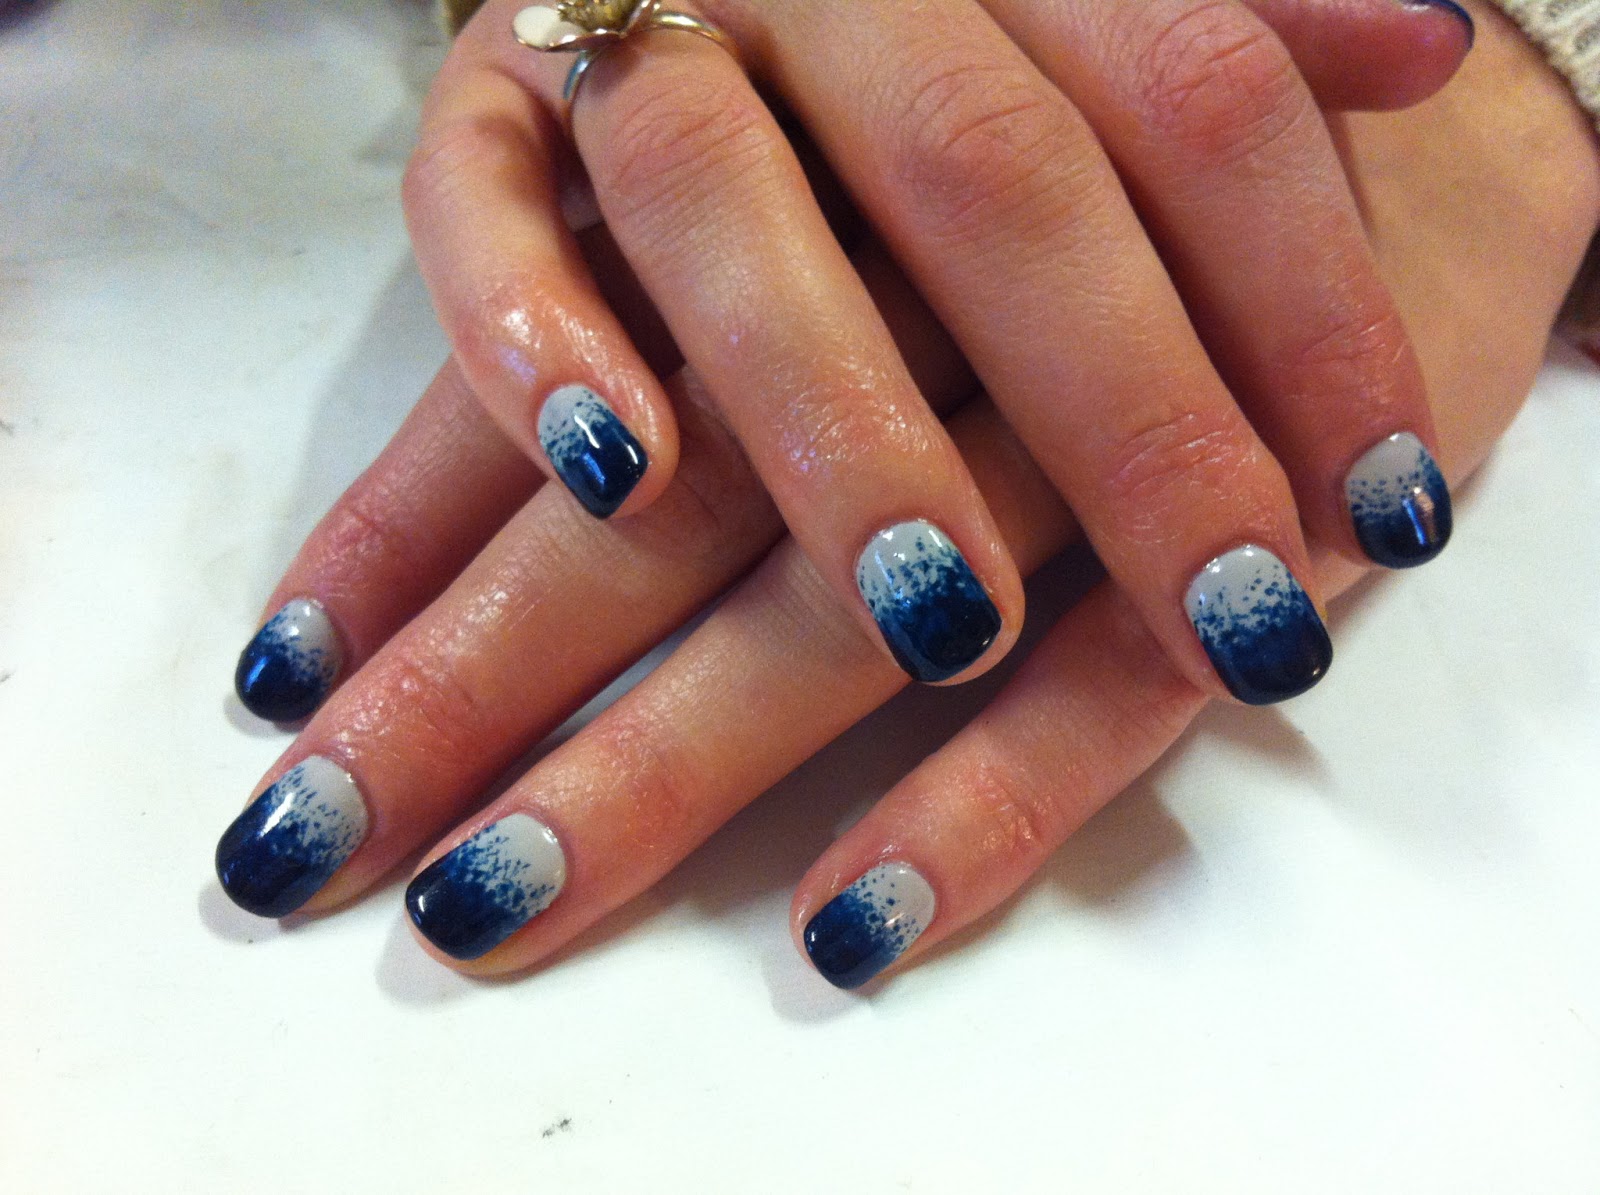 4. "2024 Shellac Nail Art Trends" - wide 10